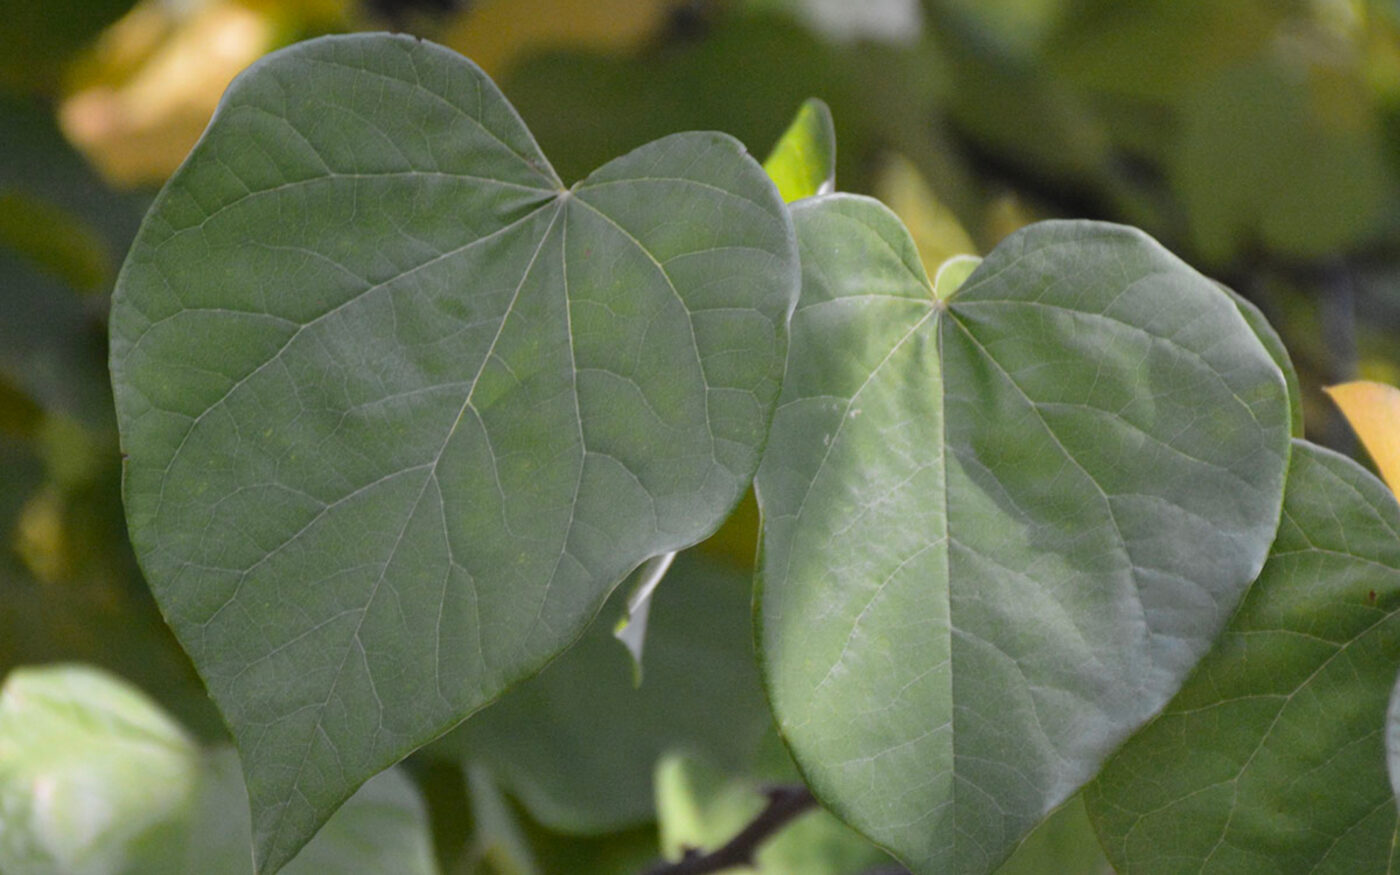 Easter Redbud heart-shaped leaves represent heart-related disorders such as Long QT Syndrome